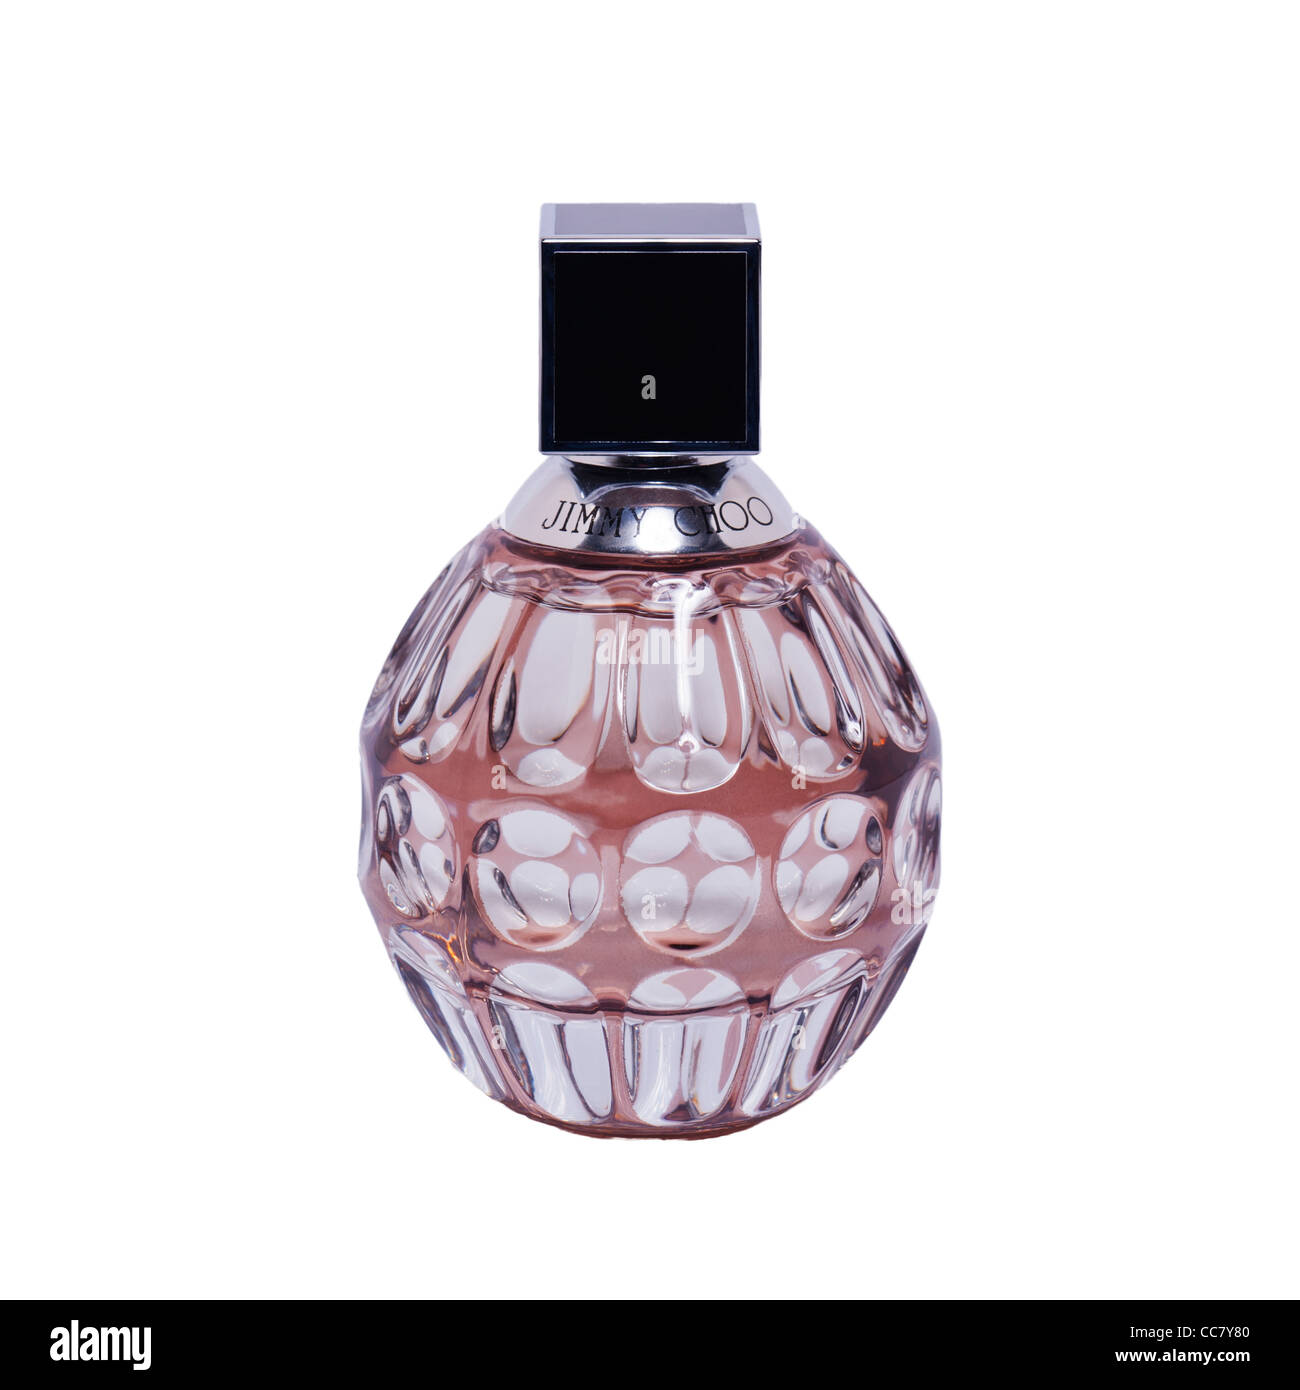 A bottle of perfume from Jimmy Choo on a white background Stock Photo